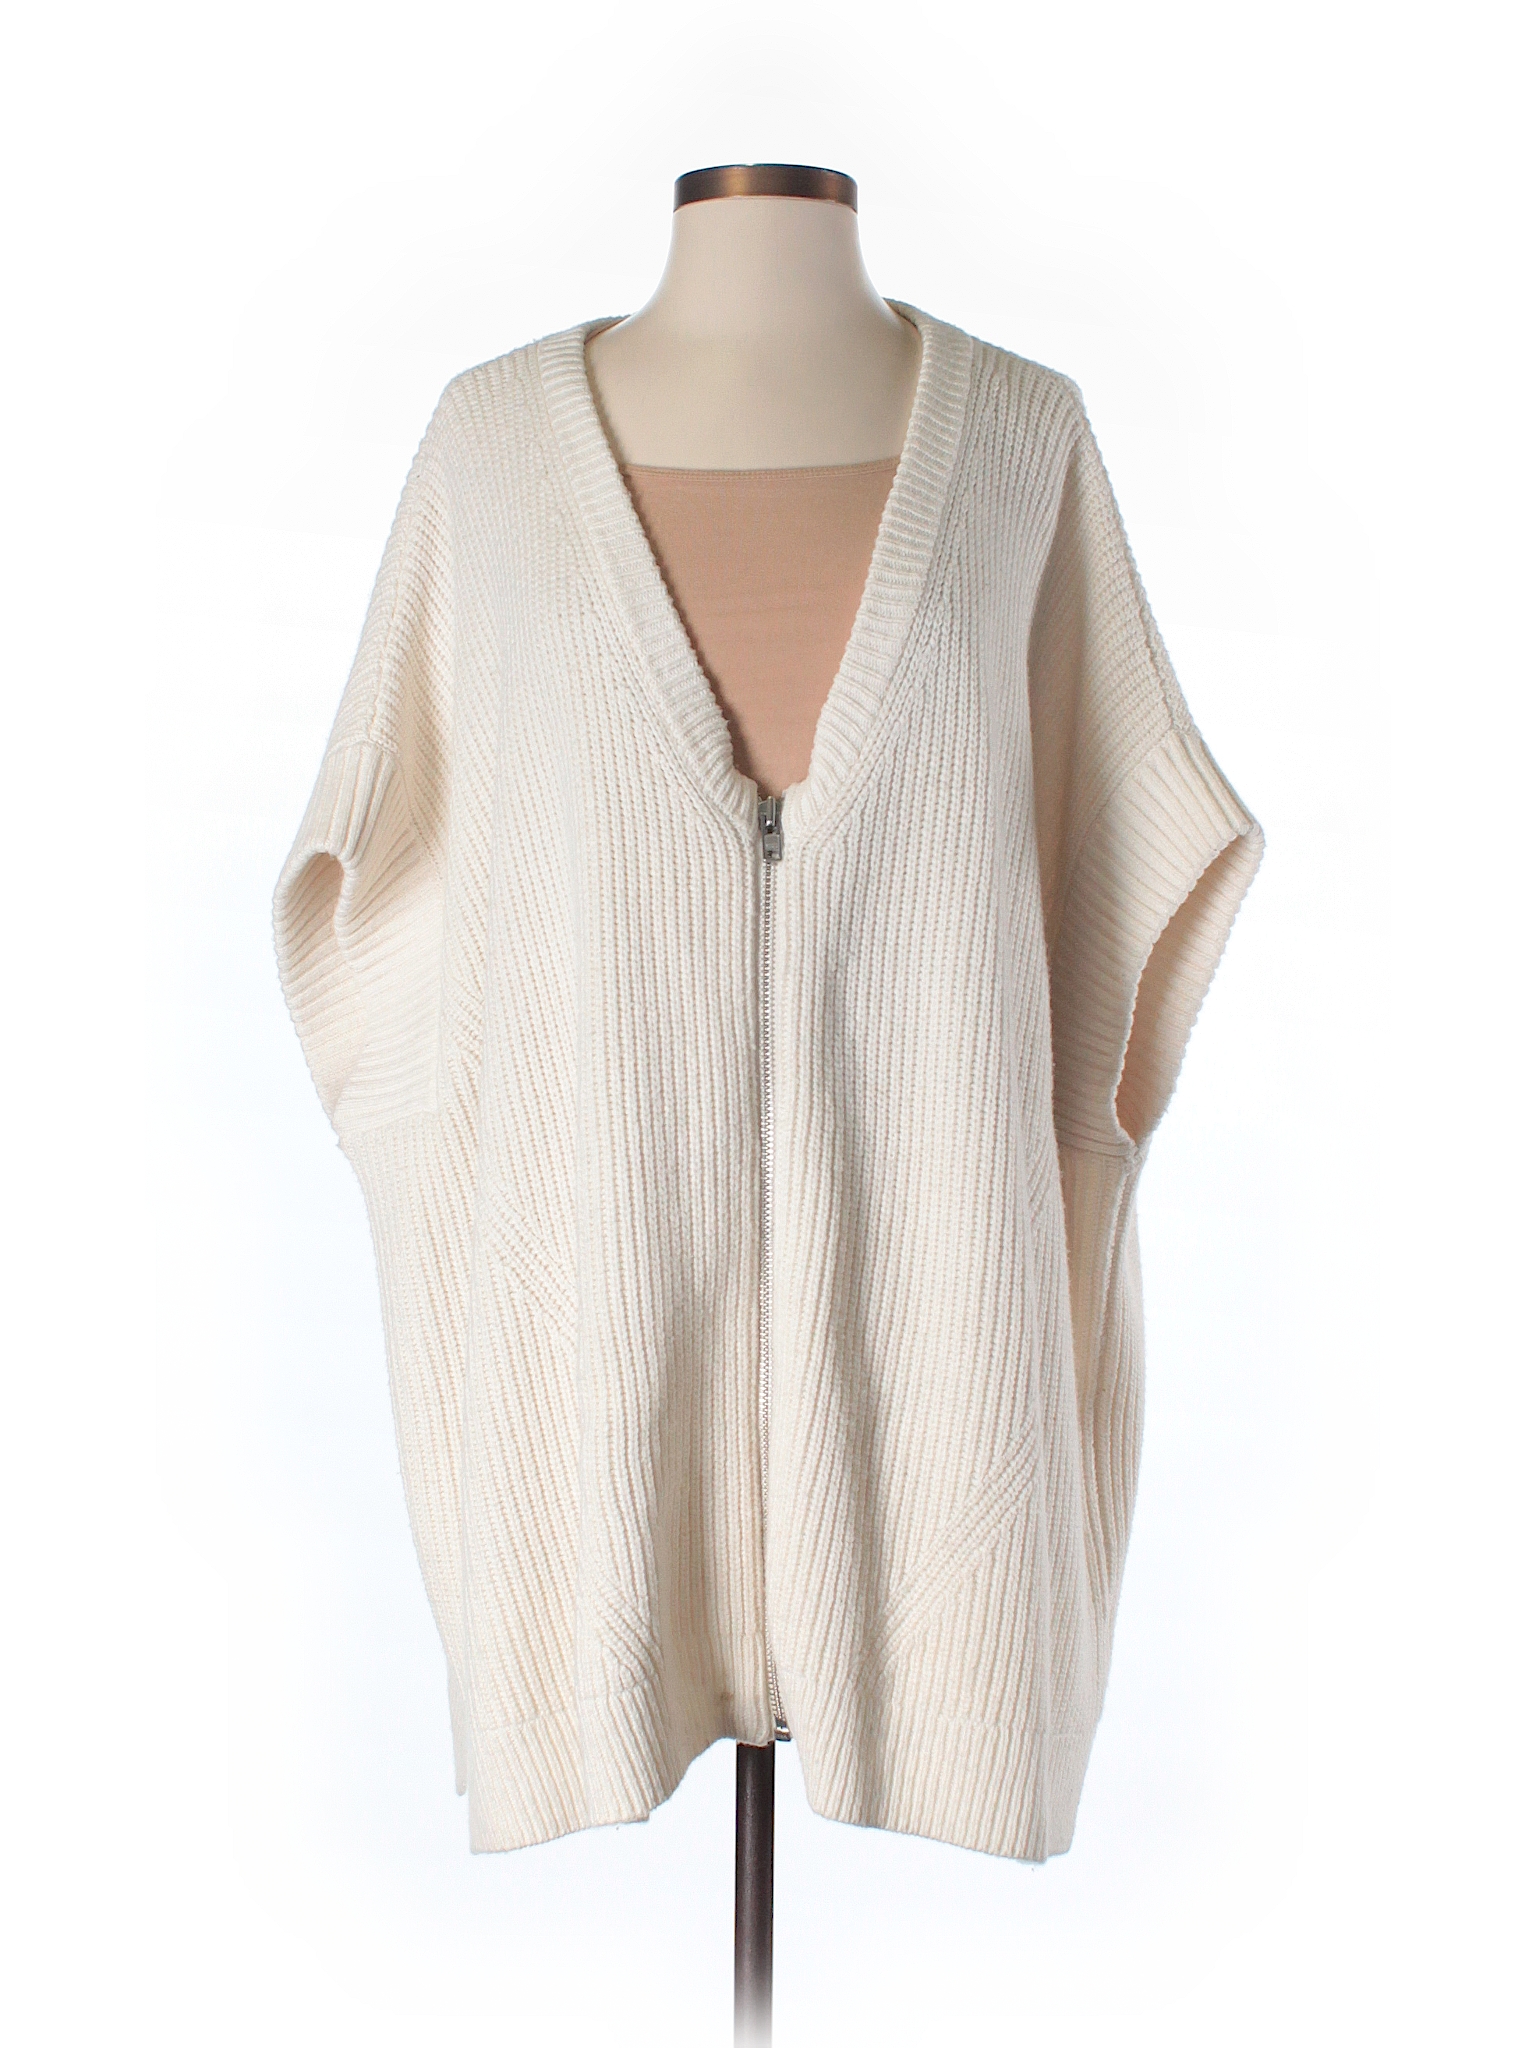 French Connection Cardigan - 78% off only on thredUP